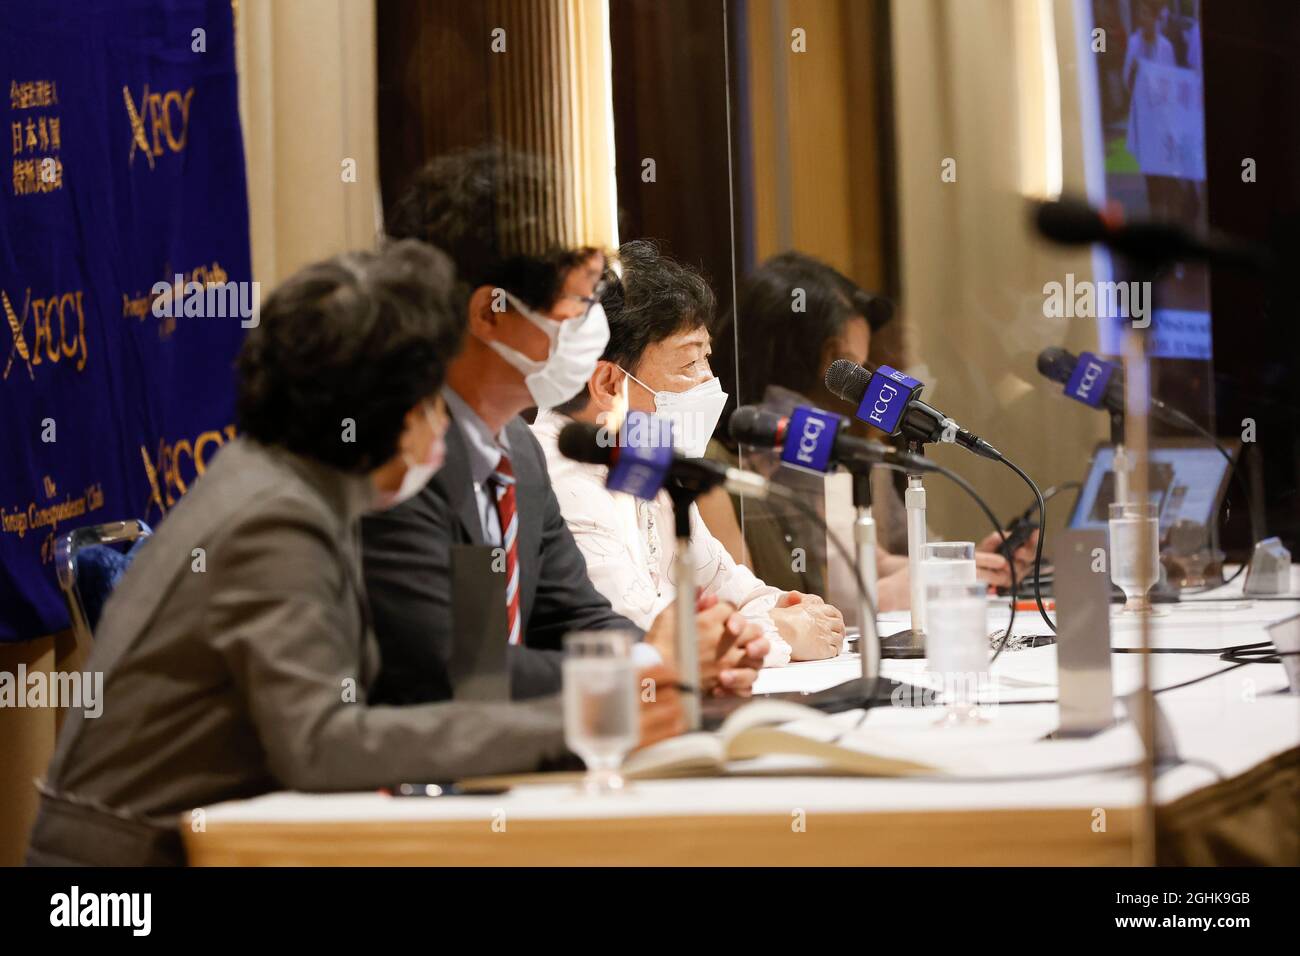 Tokyo, Japan. 07th Sep, 2021. Eiko Kawasaki (C) plaintiff and survivor of the ''paradise on earth'' campaign of North Korea repatriation program speaks during a news conference at The Foreign Correspondents' Club of Japan on September 7, 2021, Tokyo, Japan. Kawasaki and the lawyer Kenji Fukuda spoke about the victims of the North Korea repatriation program and the litigation in the Tokyo District Court, which next oral argument has been set on October 14. Credit: Rodrigo Reyes Marin/AFLO/Alamy Live News Credit: Aflo Co. Ltd./Alamy Live News Stock Photo